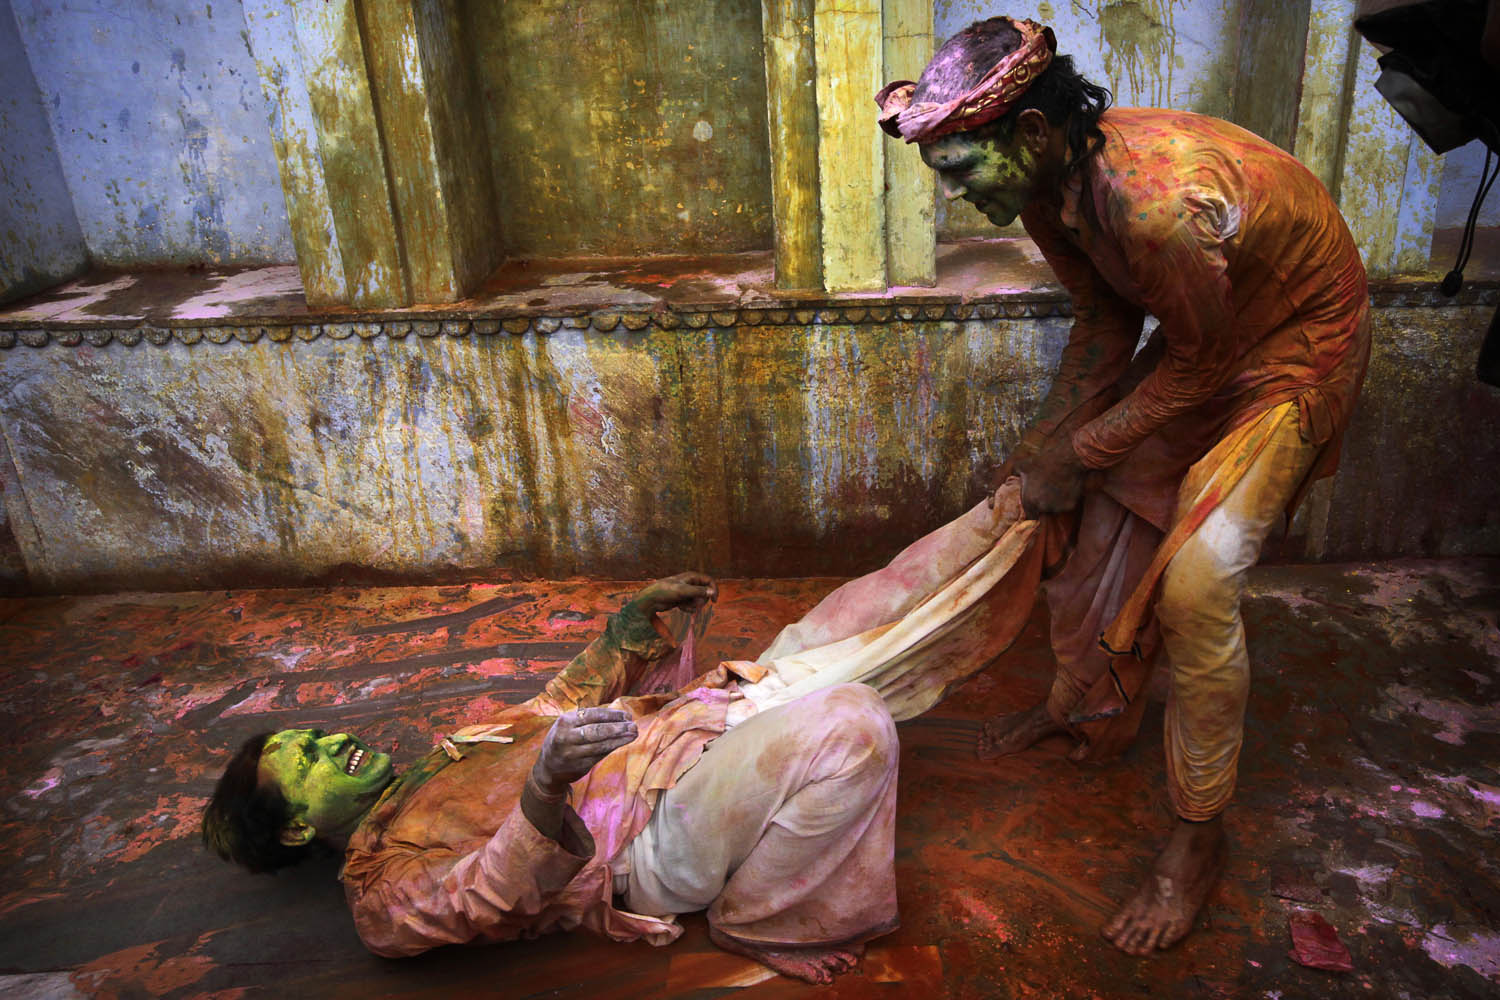 March 22, 2013. Indian Hindu devotees smeared with colors play  at the Nandagram temple famous for Lord Krishna and his brother Balram, during Lathmar holy festival, in Nandgaon 120 kilometers ( 75 miles)  from New Delhi, India. During Lathmar Holi the women of Nandgaon, the hometown of Krishna, beat the men from Barsana , the legendary hometown of Radha, consort of Hindu God Krishna , with wooden sticks in response to their teasing as they depart the town.